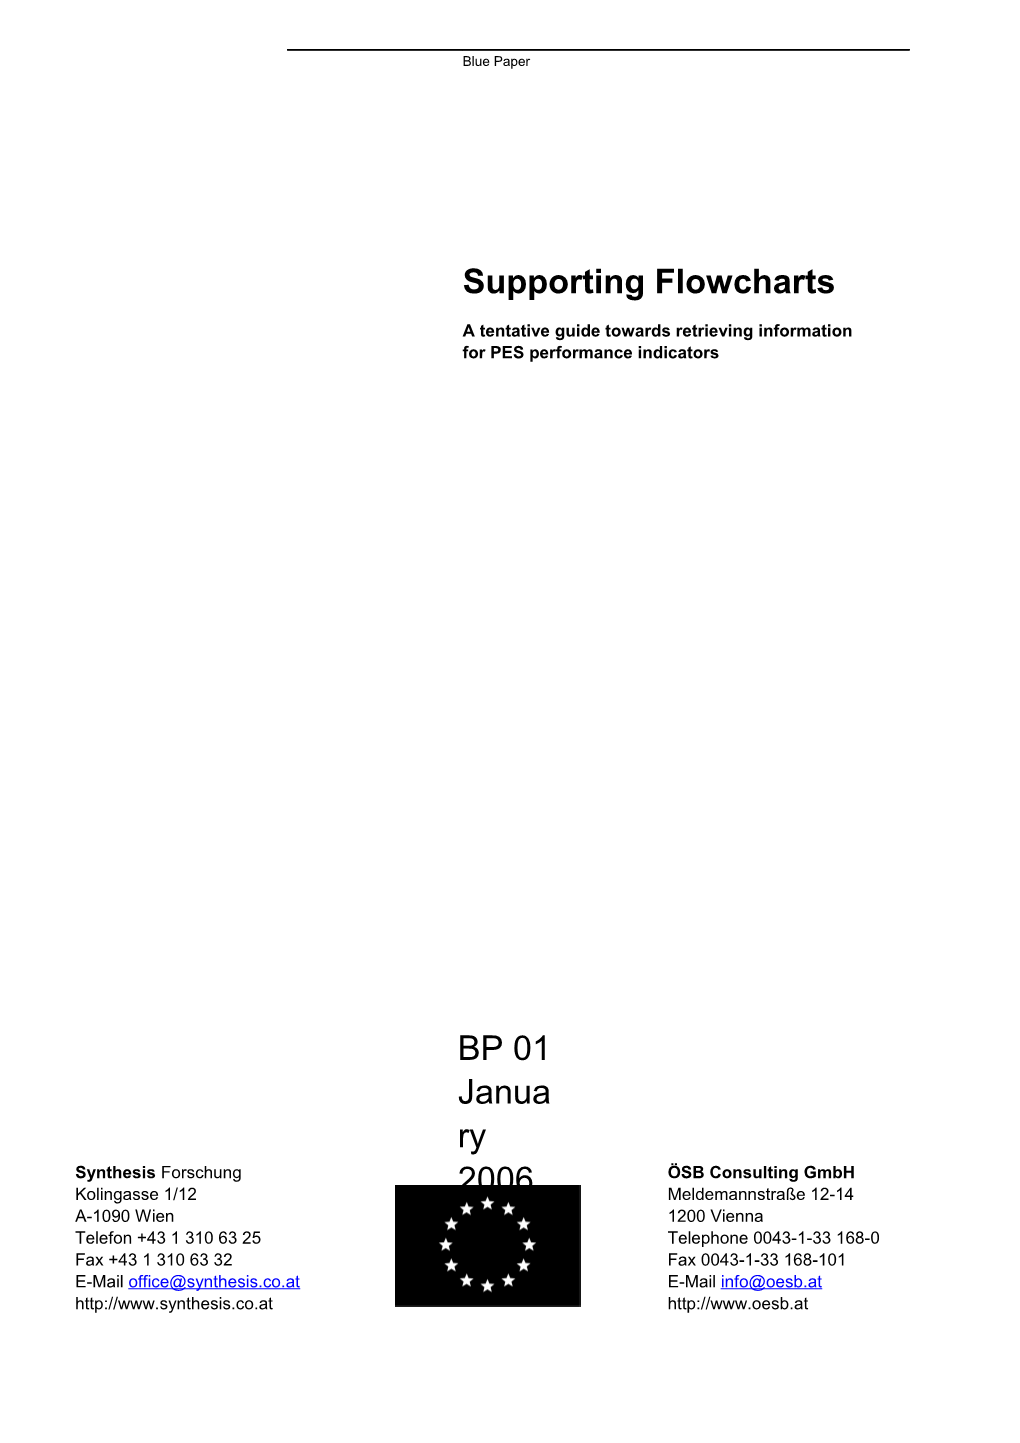 Supporting Flowcharts